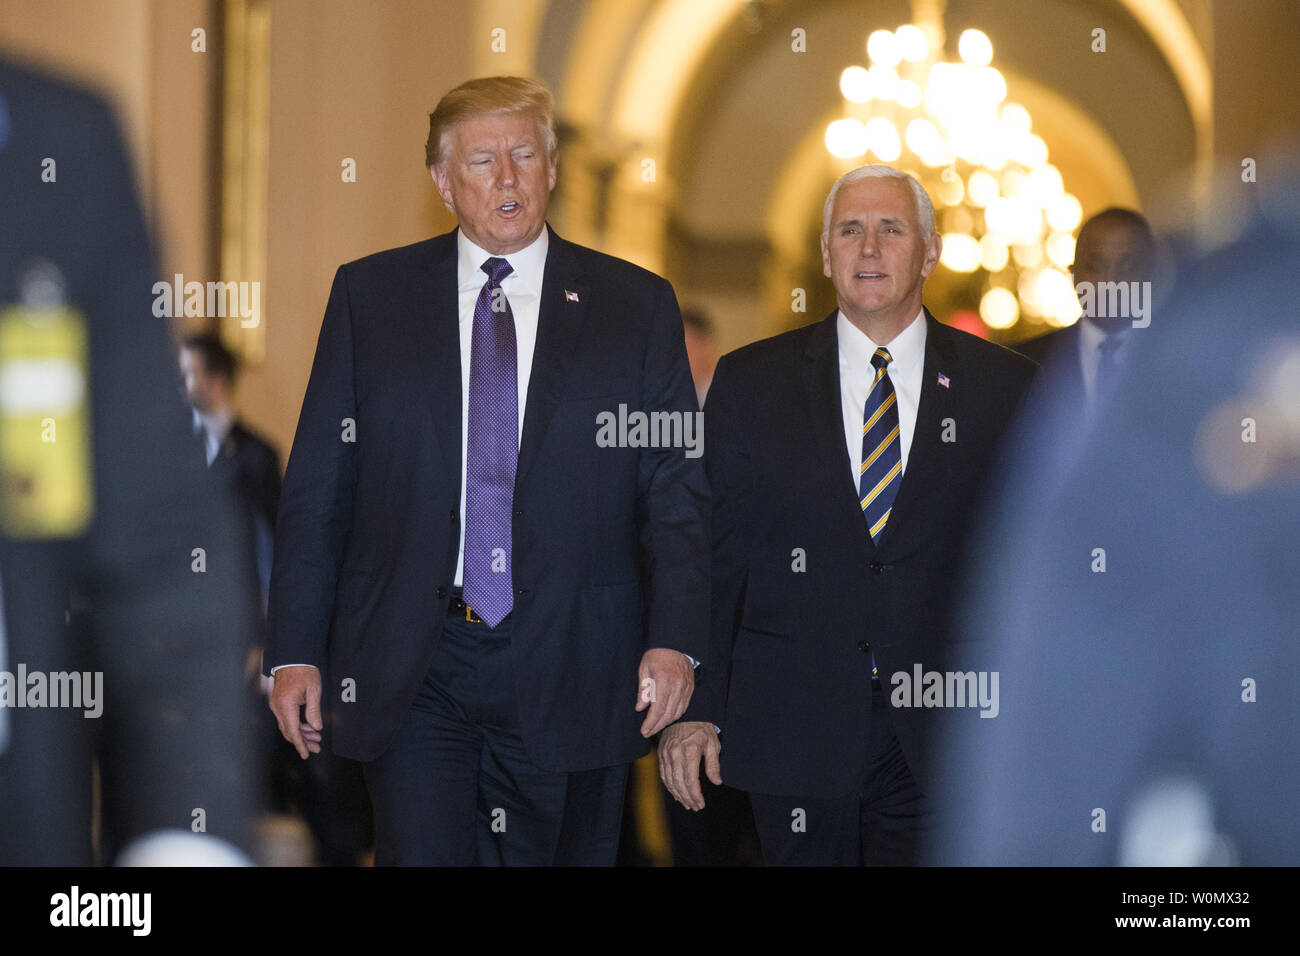 President Donald Trump and Vice President Mike Pence leave the U.S. Capitol after meeting with members of congress on the impending vote on the GOP tax reform bill, November 16, 2017 in Washington, D.C.     Photo by Jim Lo Scalzo/UPI Stock Photo